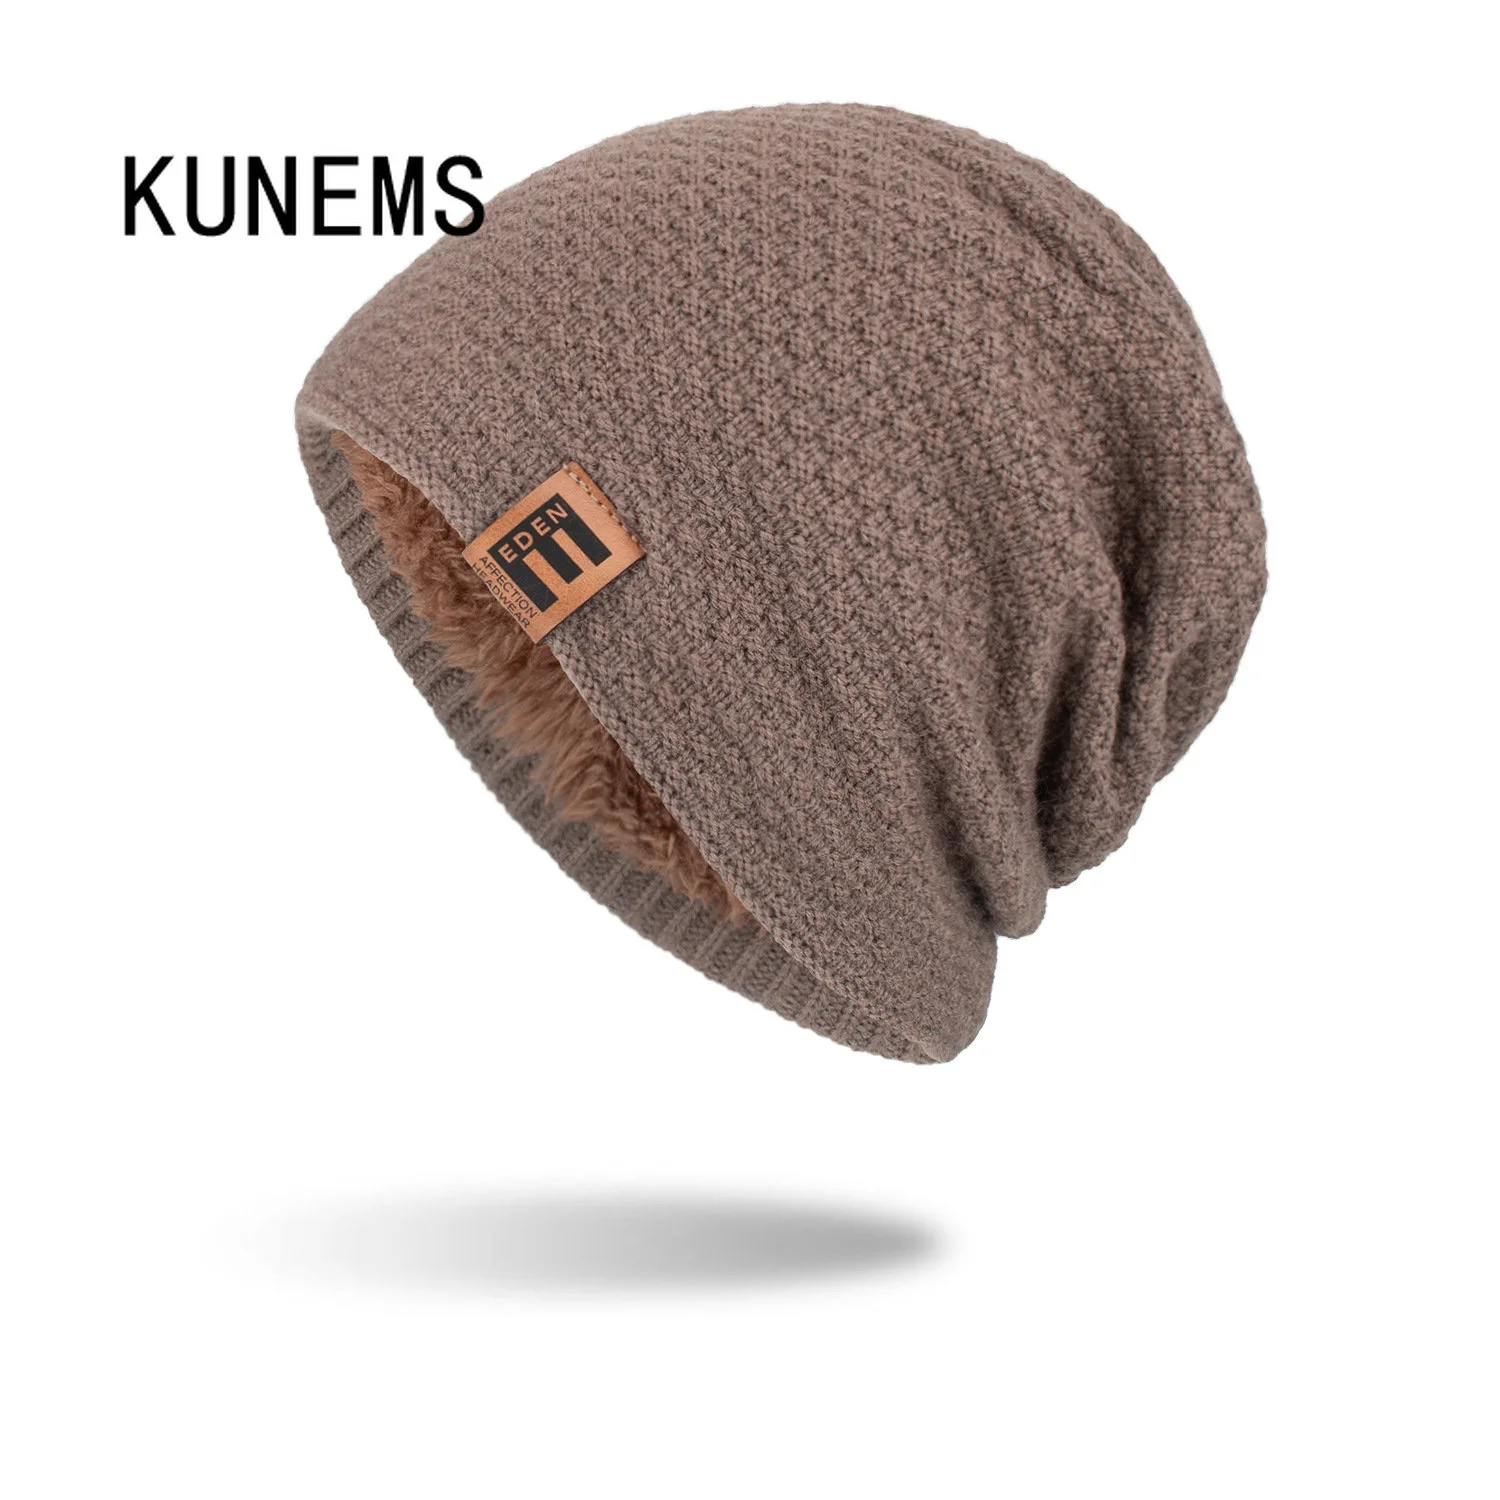 

KUNEMS Winter ats for Men Fasion Skullies Beanies Bonnets Keep Warm Knitted Caps Casual Soft at Dad Cap orras ombre